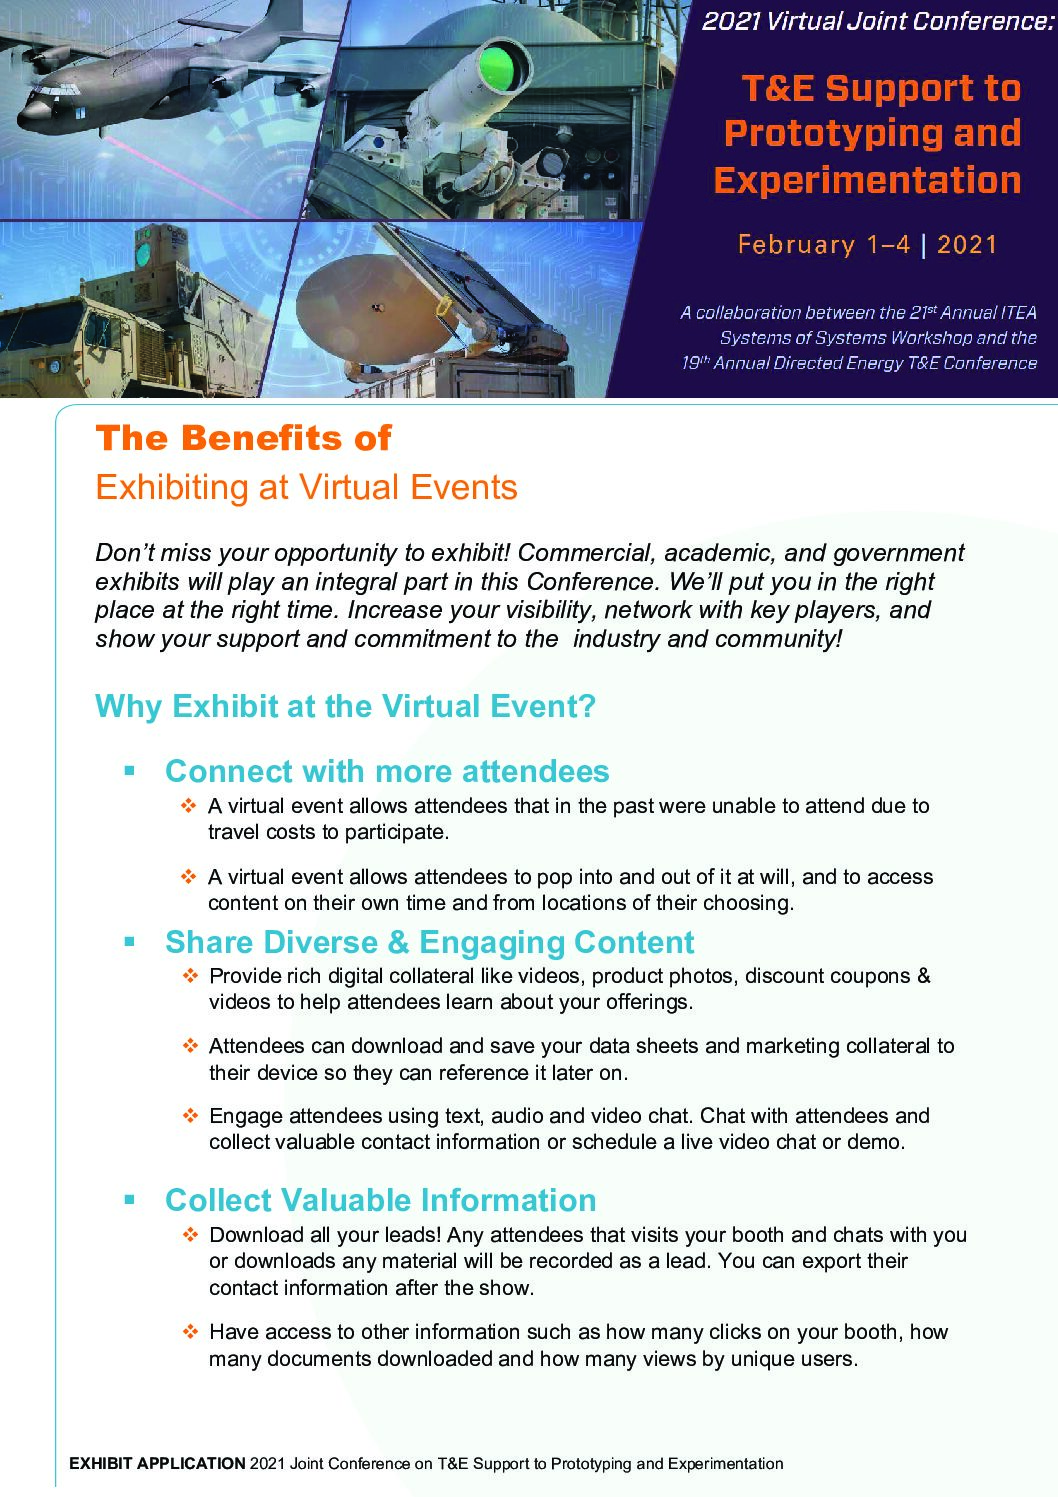 Joint Conference Virtual Exhibit Application